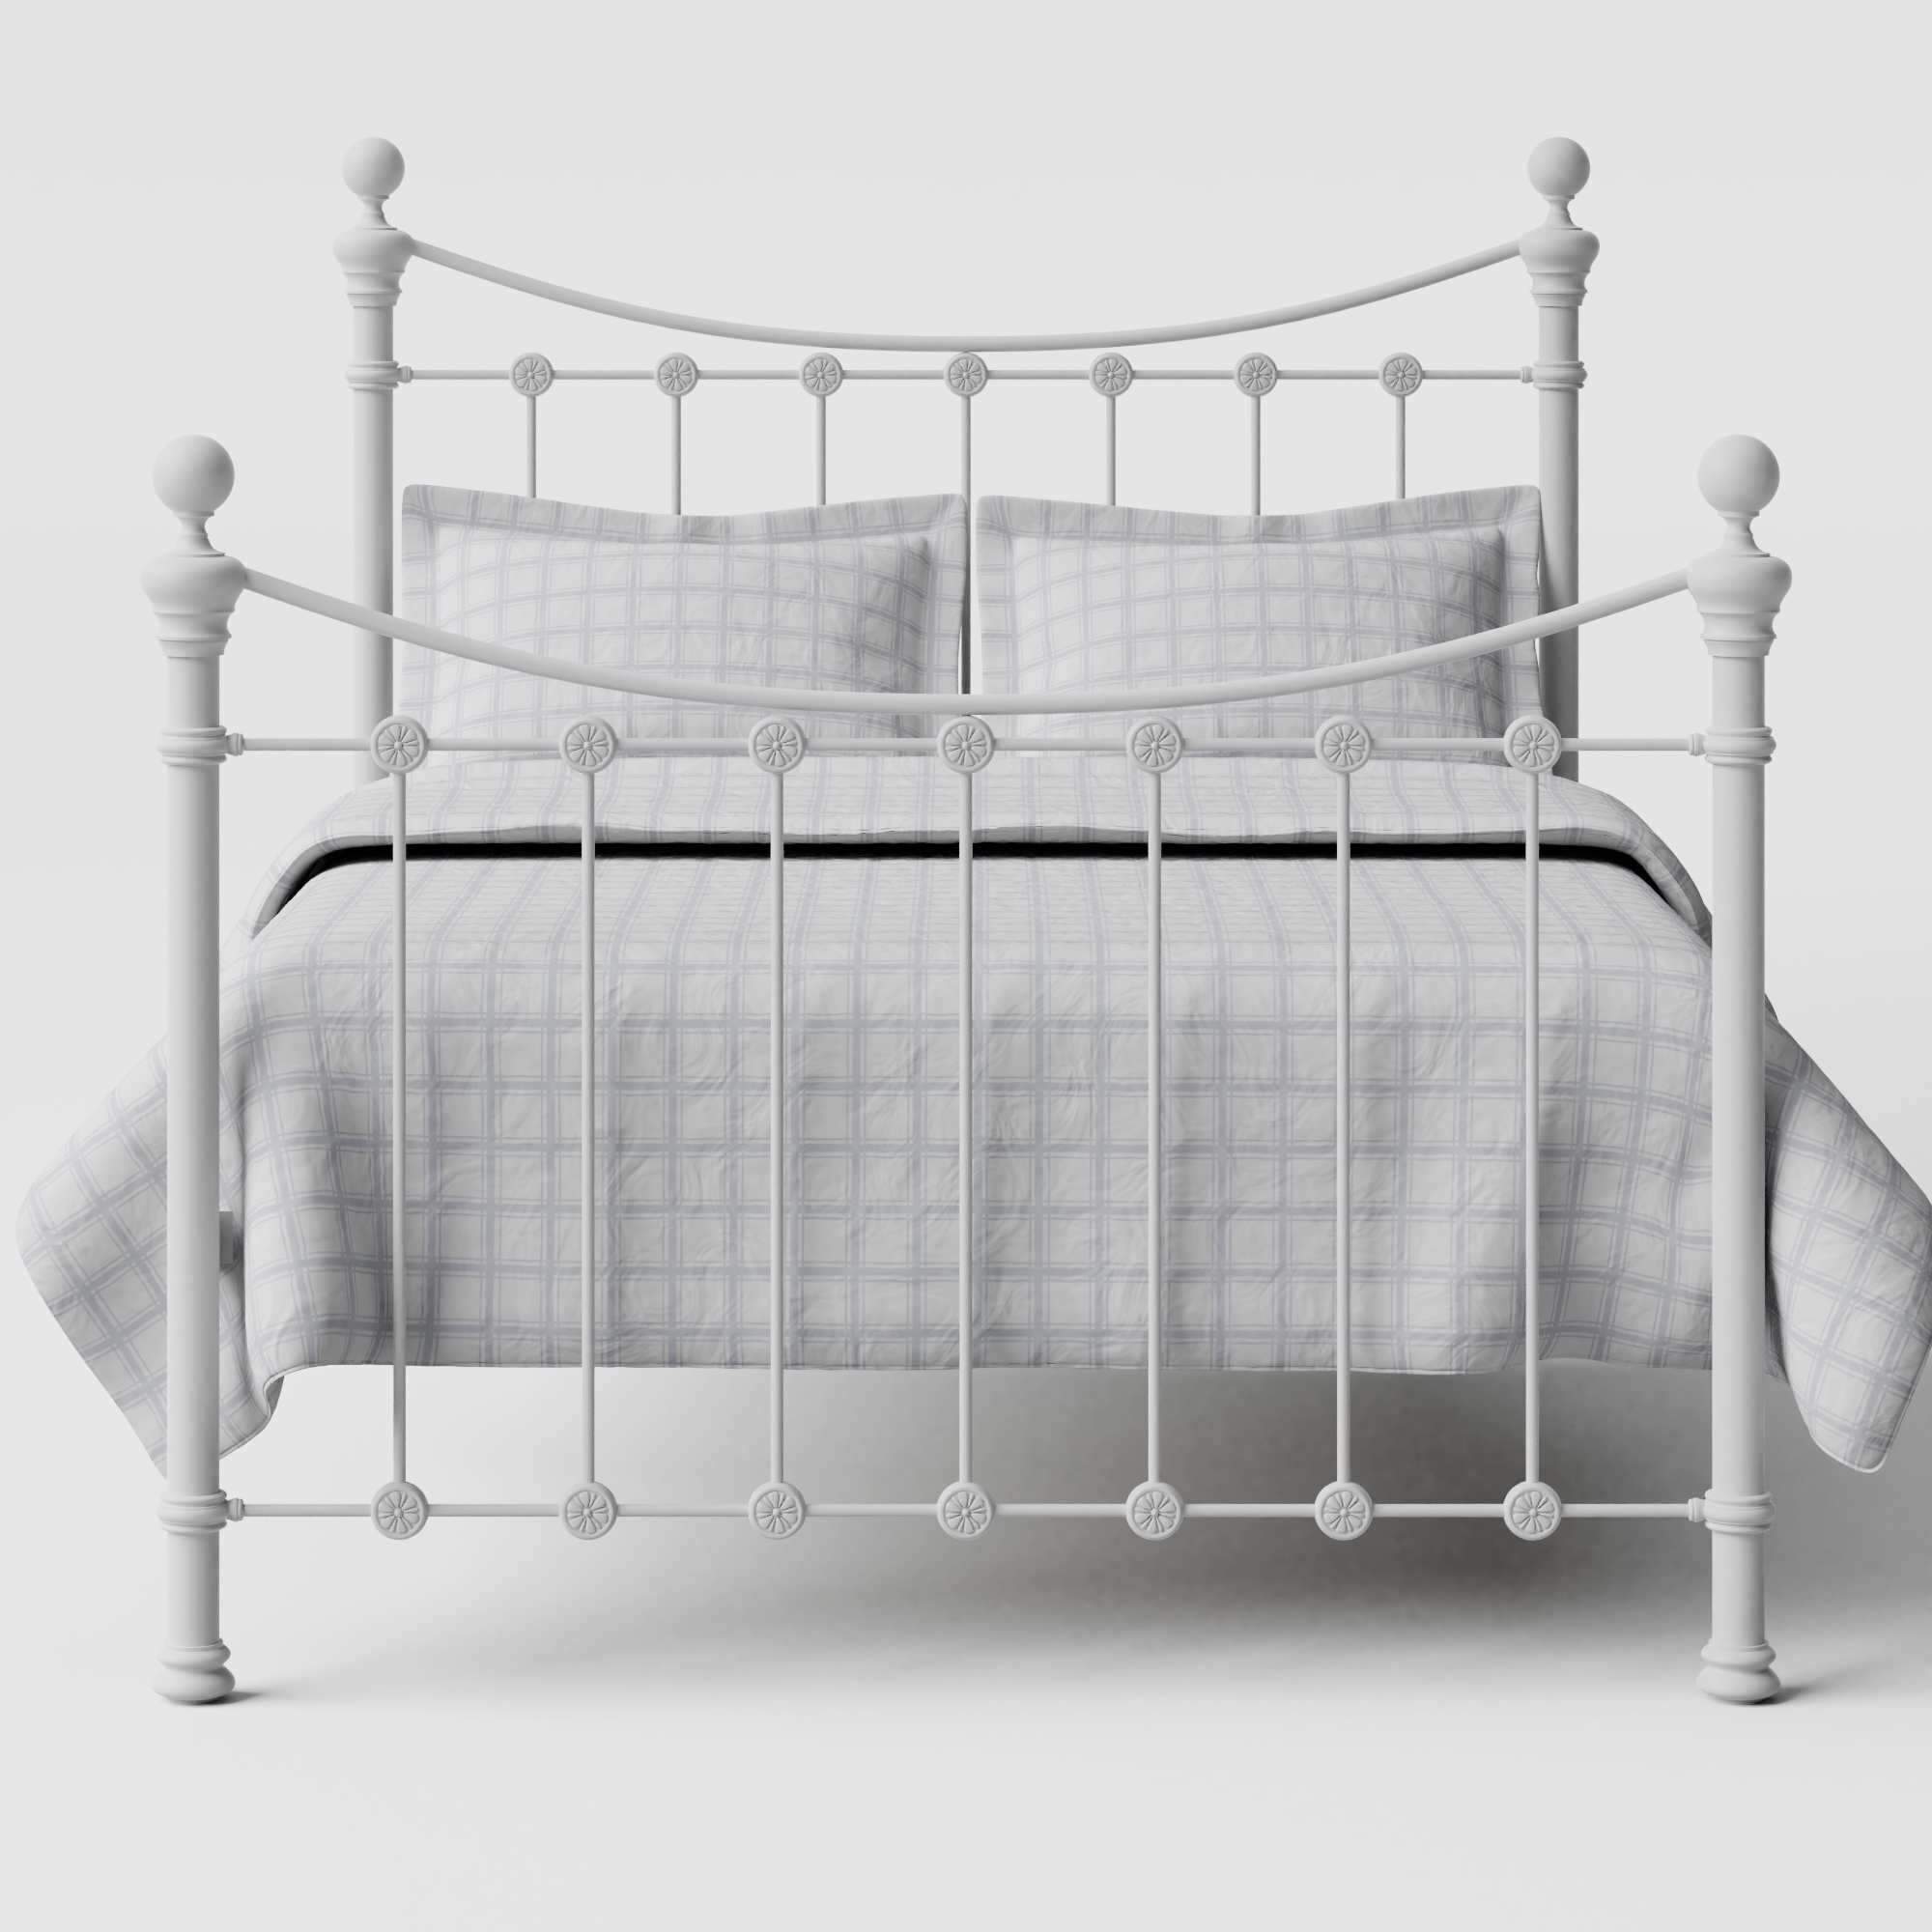 Selkirk Solo iron/metal bed in white